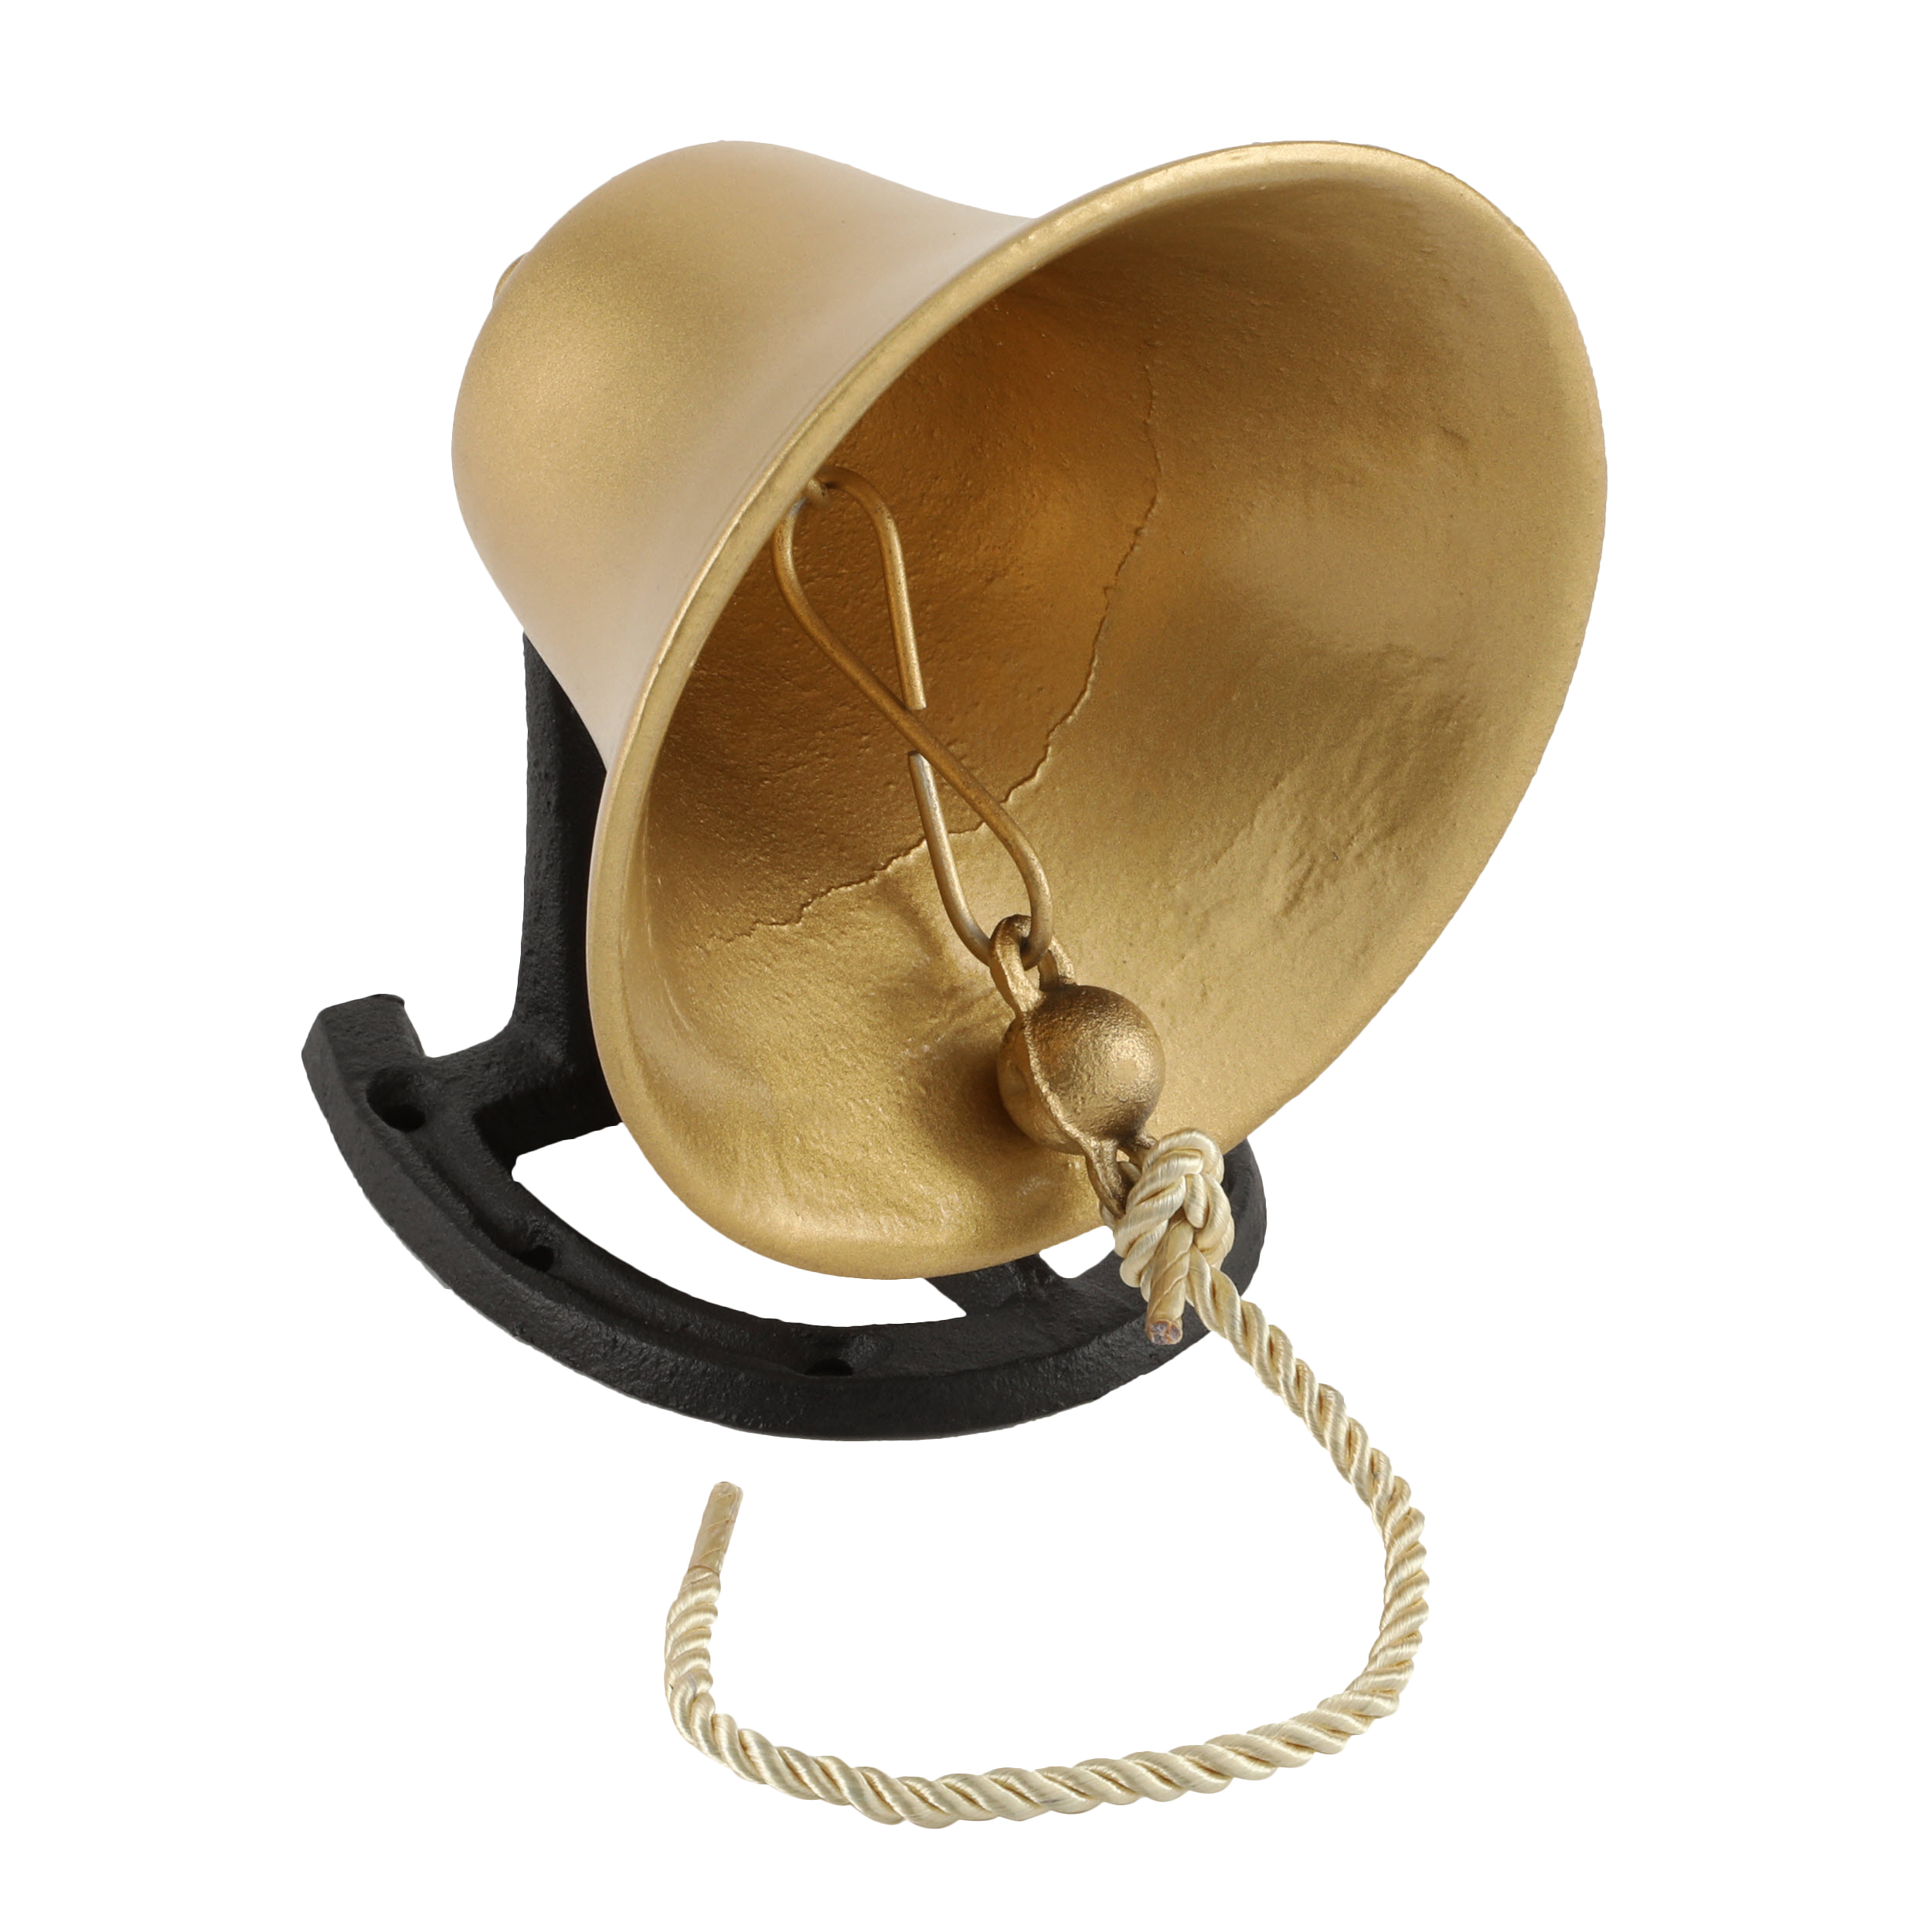 Gorilla Playsets Metal Dinner Bell Accessory with Black Horseshoe Mount - Gold - image 3 of 4